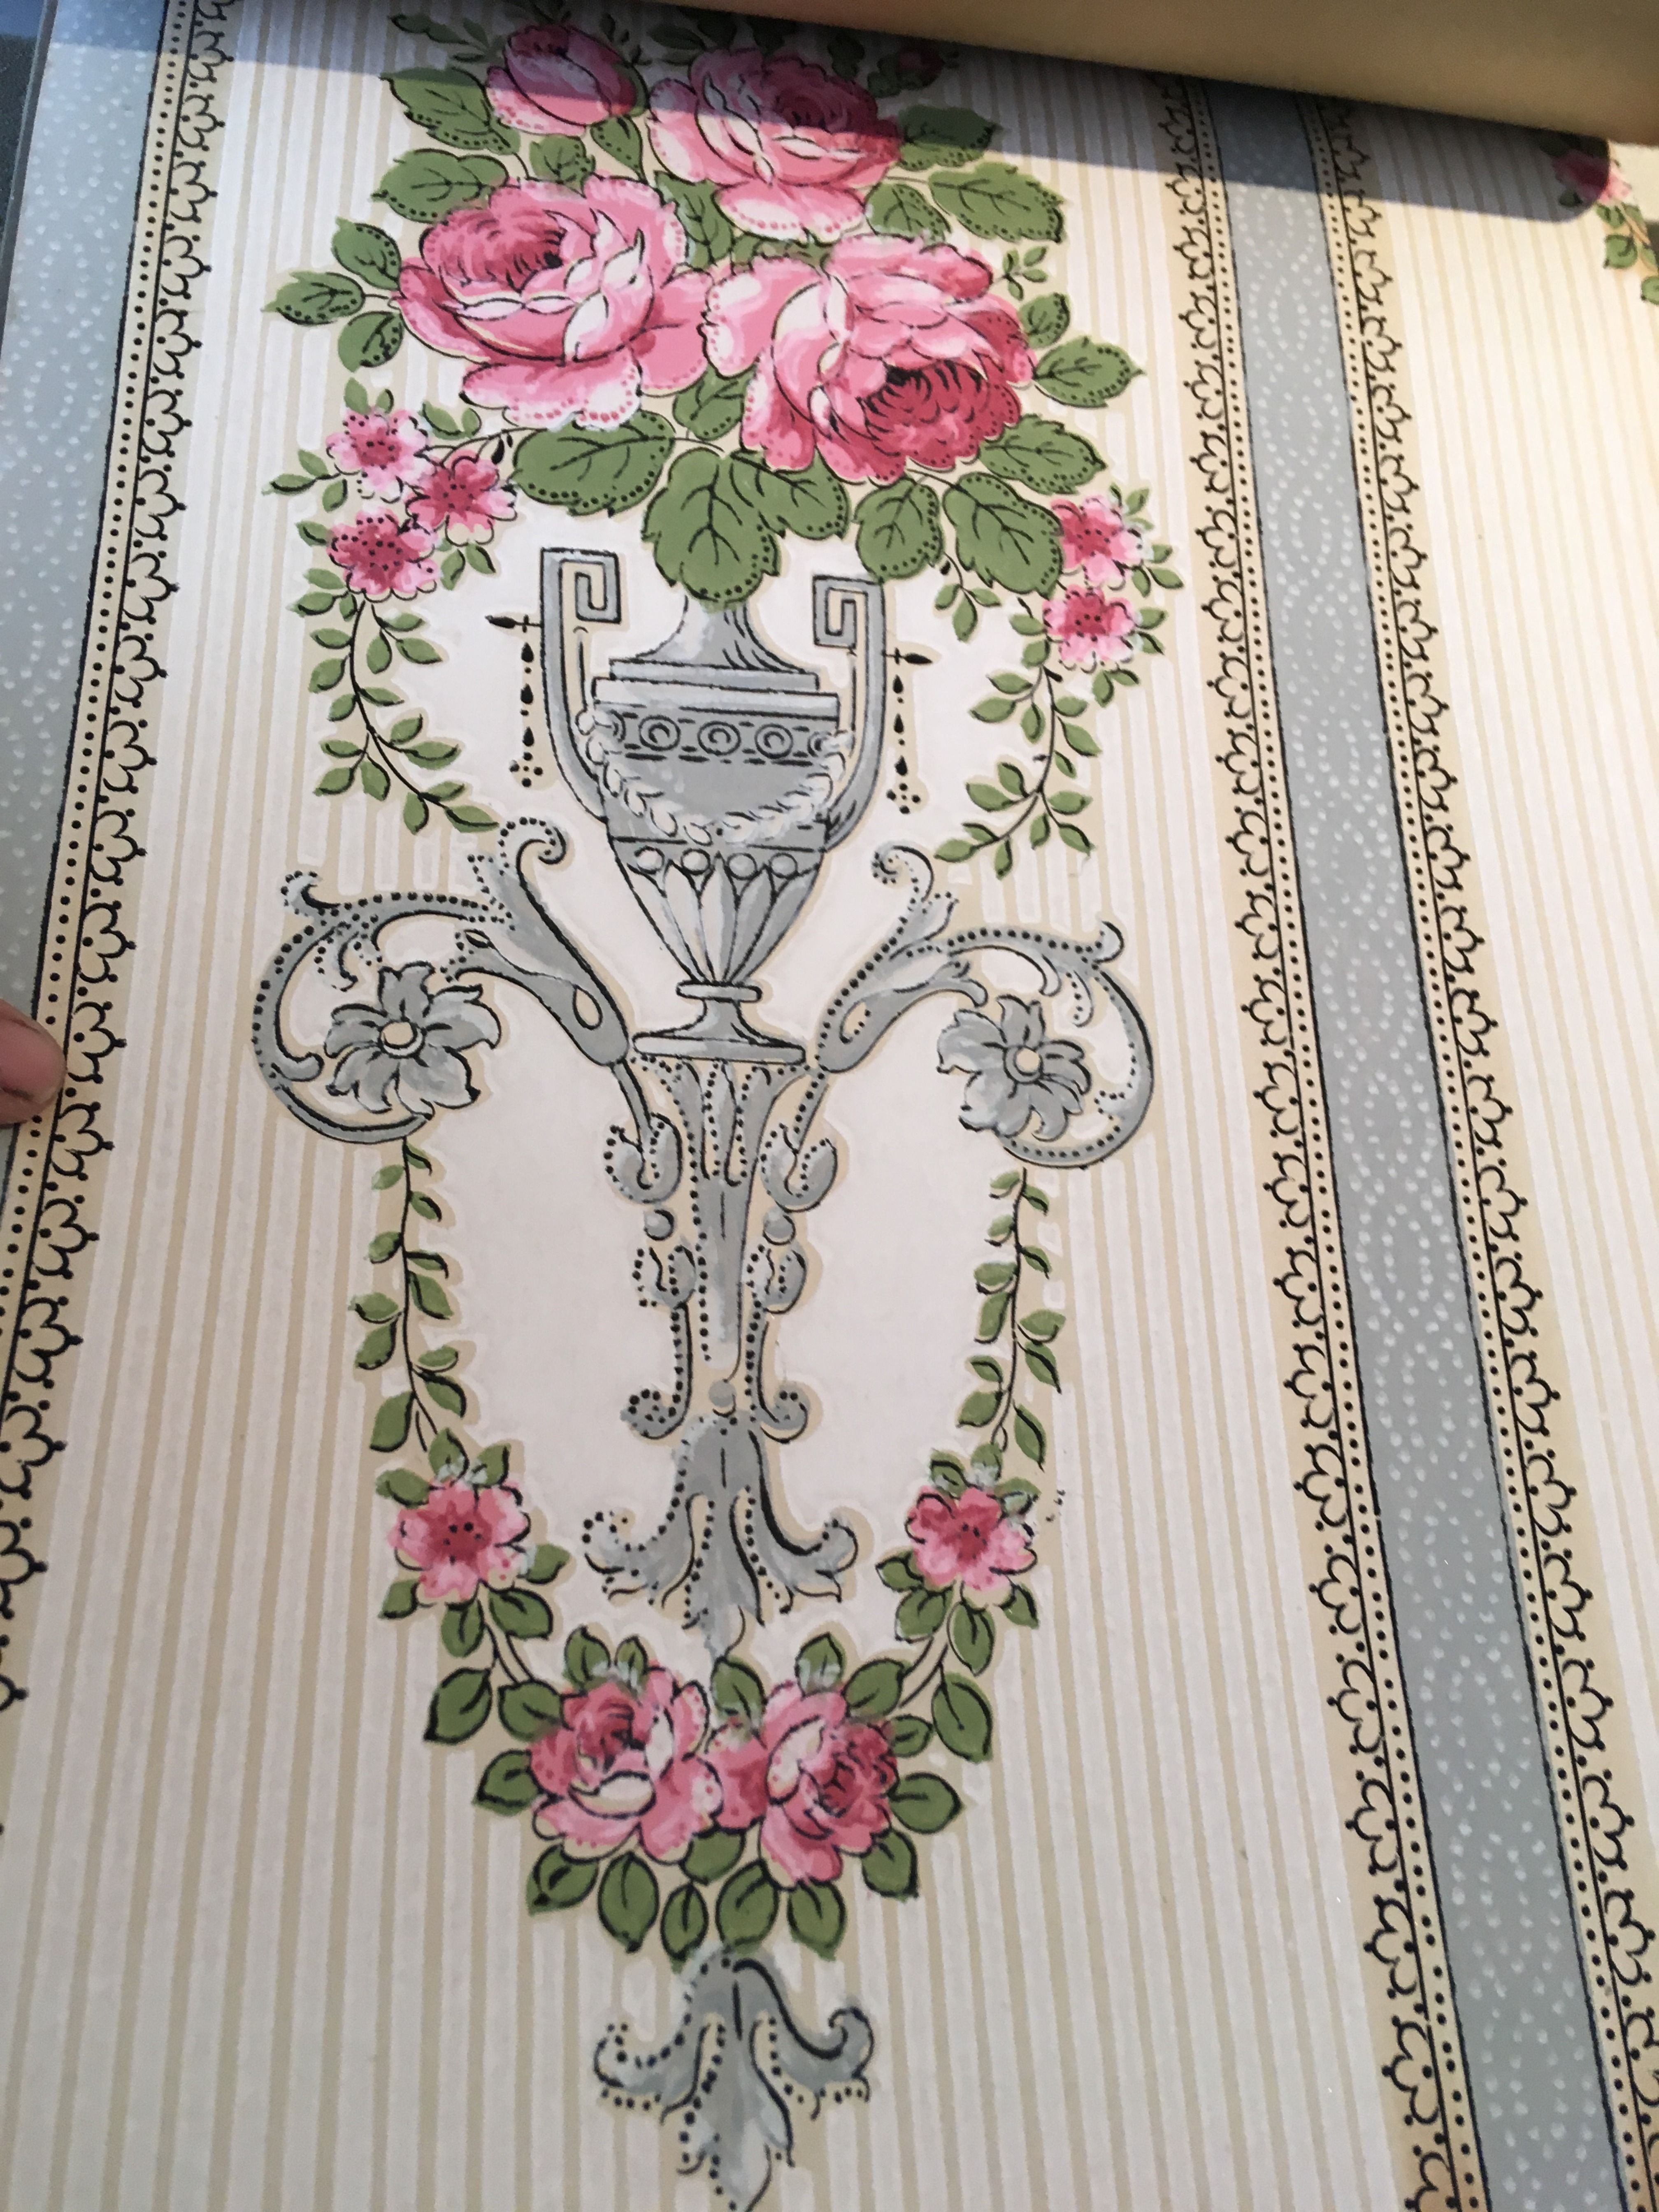 1914 antique Edwardian wallpaper with floral design from New Era